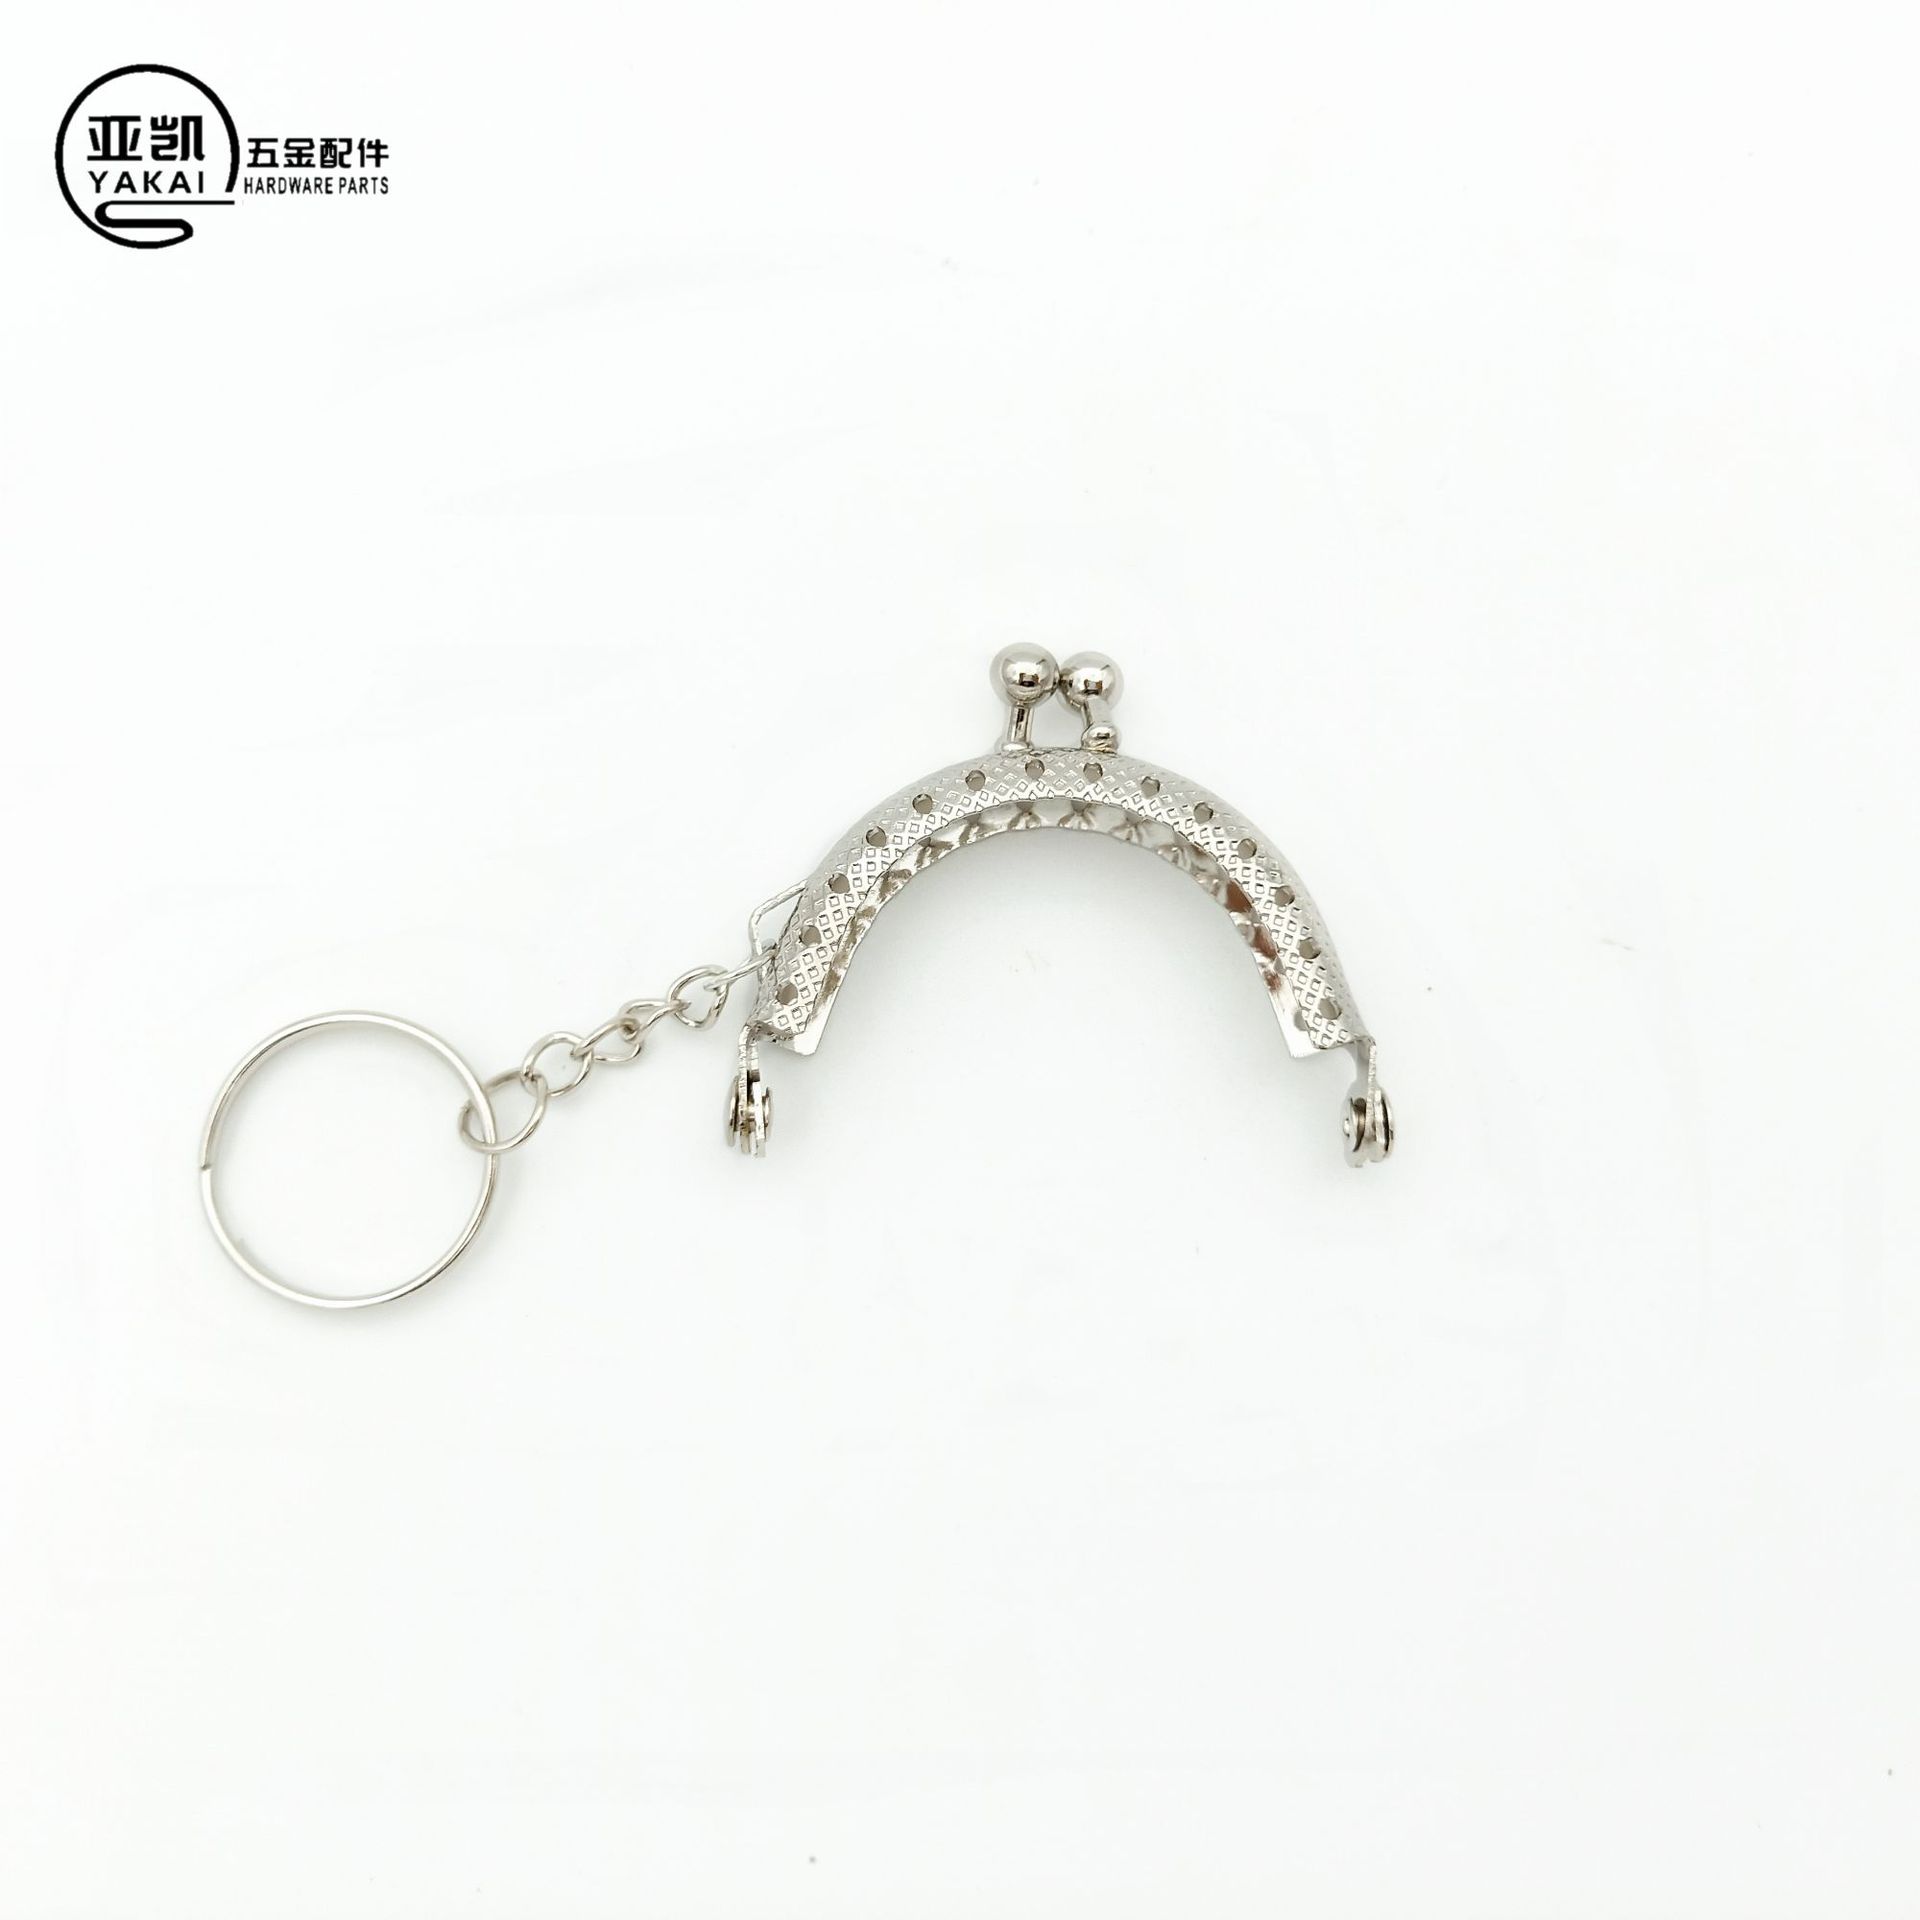 Spot Goods Binaural 5cm Semicircle with Key Ring Purse Frame Mini Small Purse Frame Wholesale Wallet Purse Frame Box and Bag Hardware